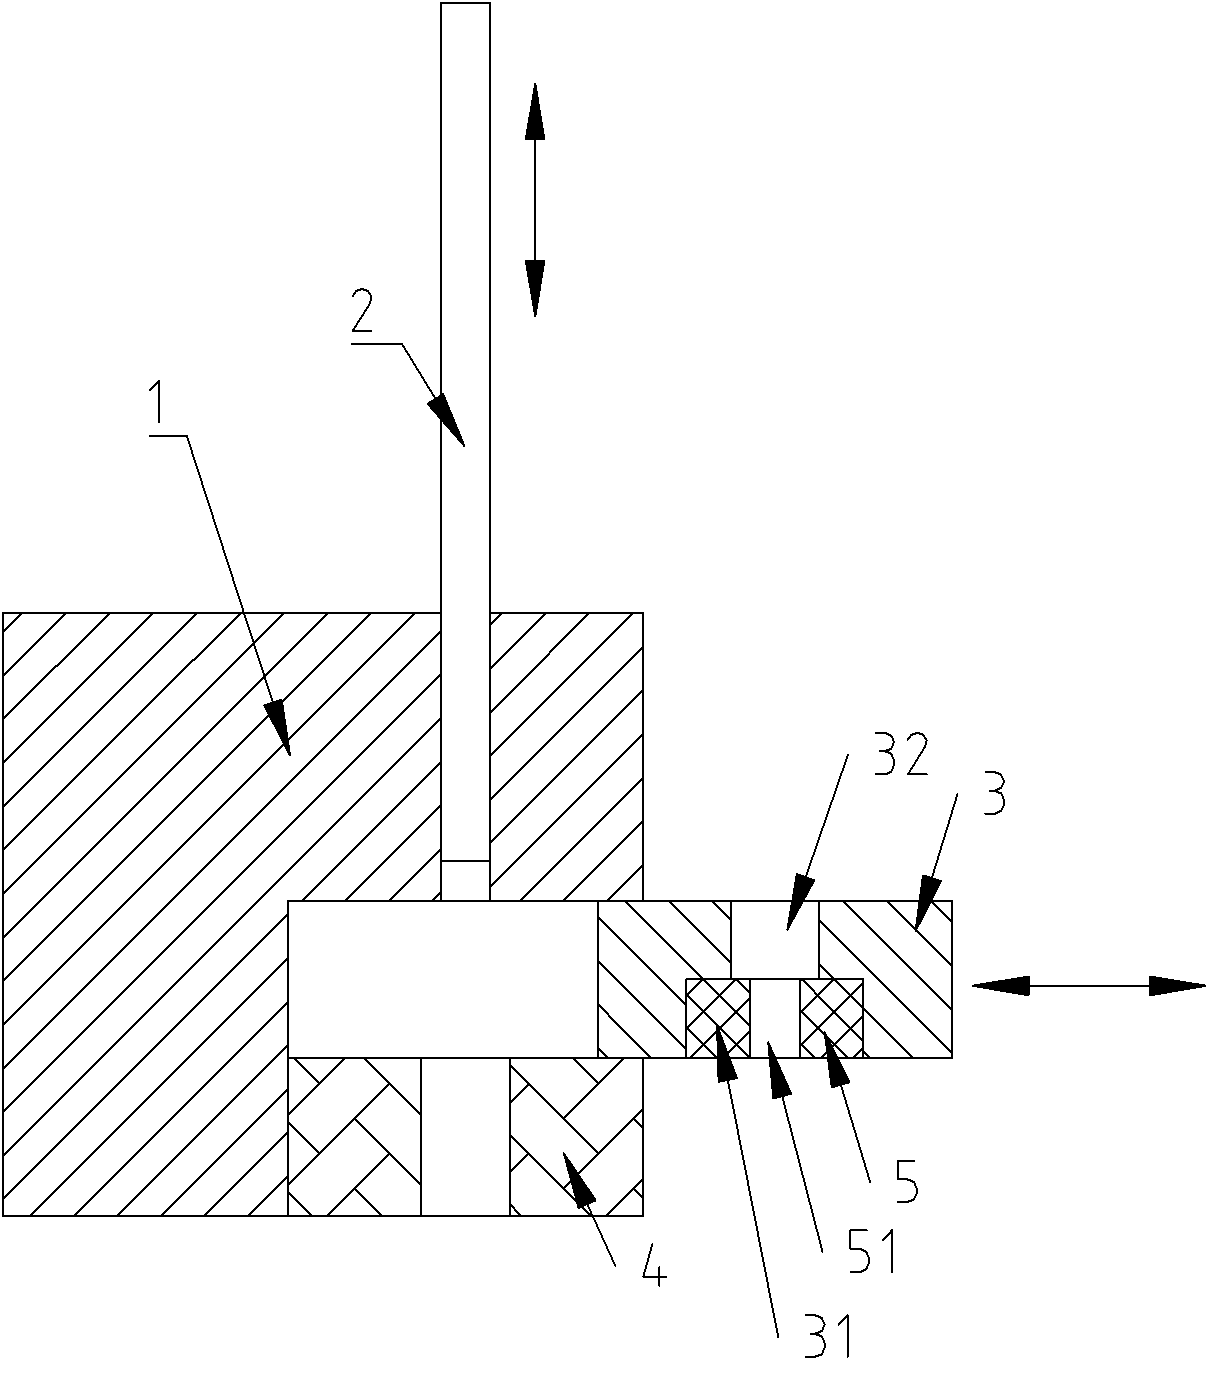 Product detection and sorting device for detecting aperture and sorting unqualified products